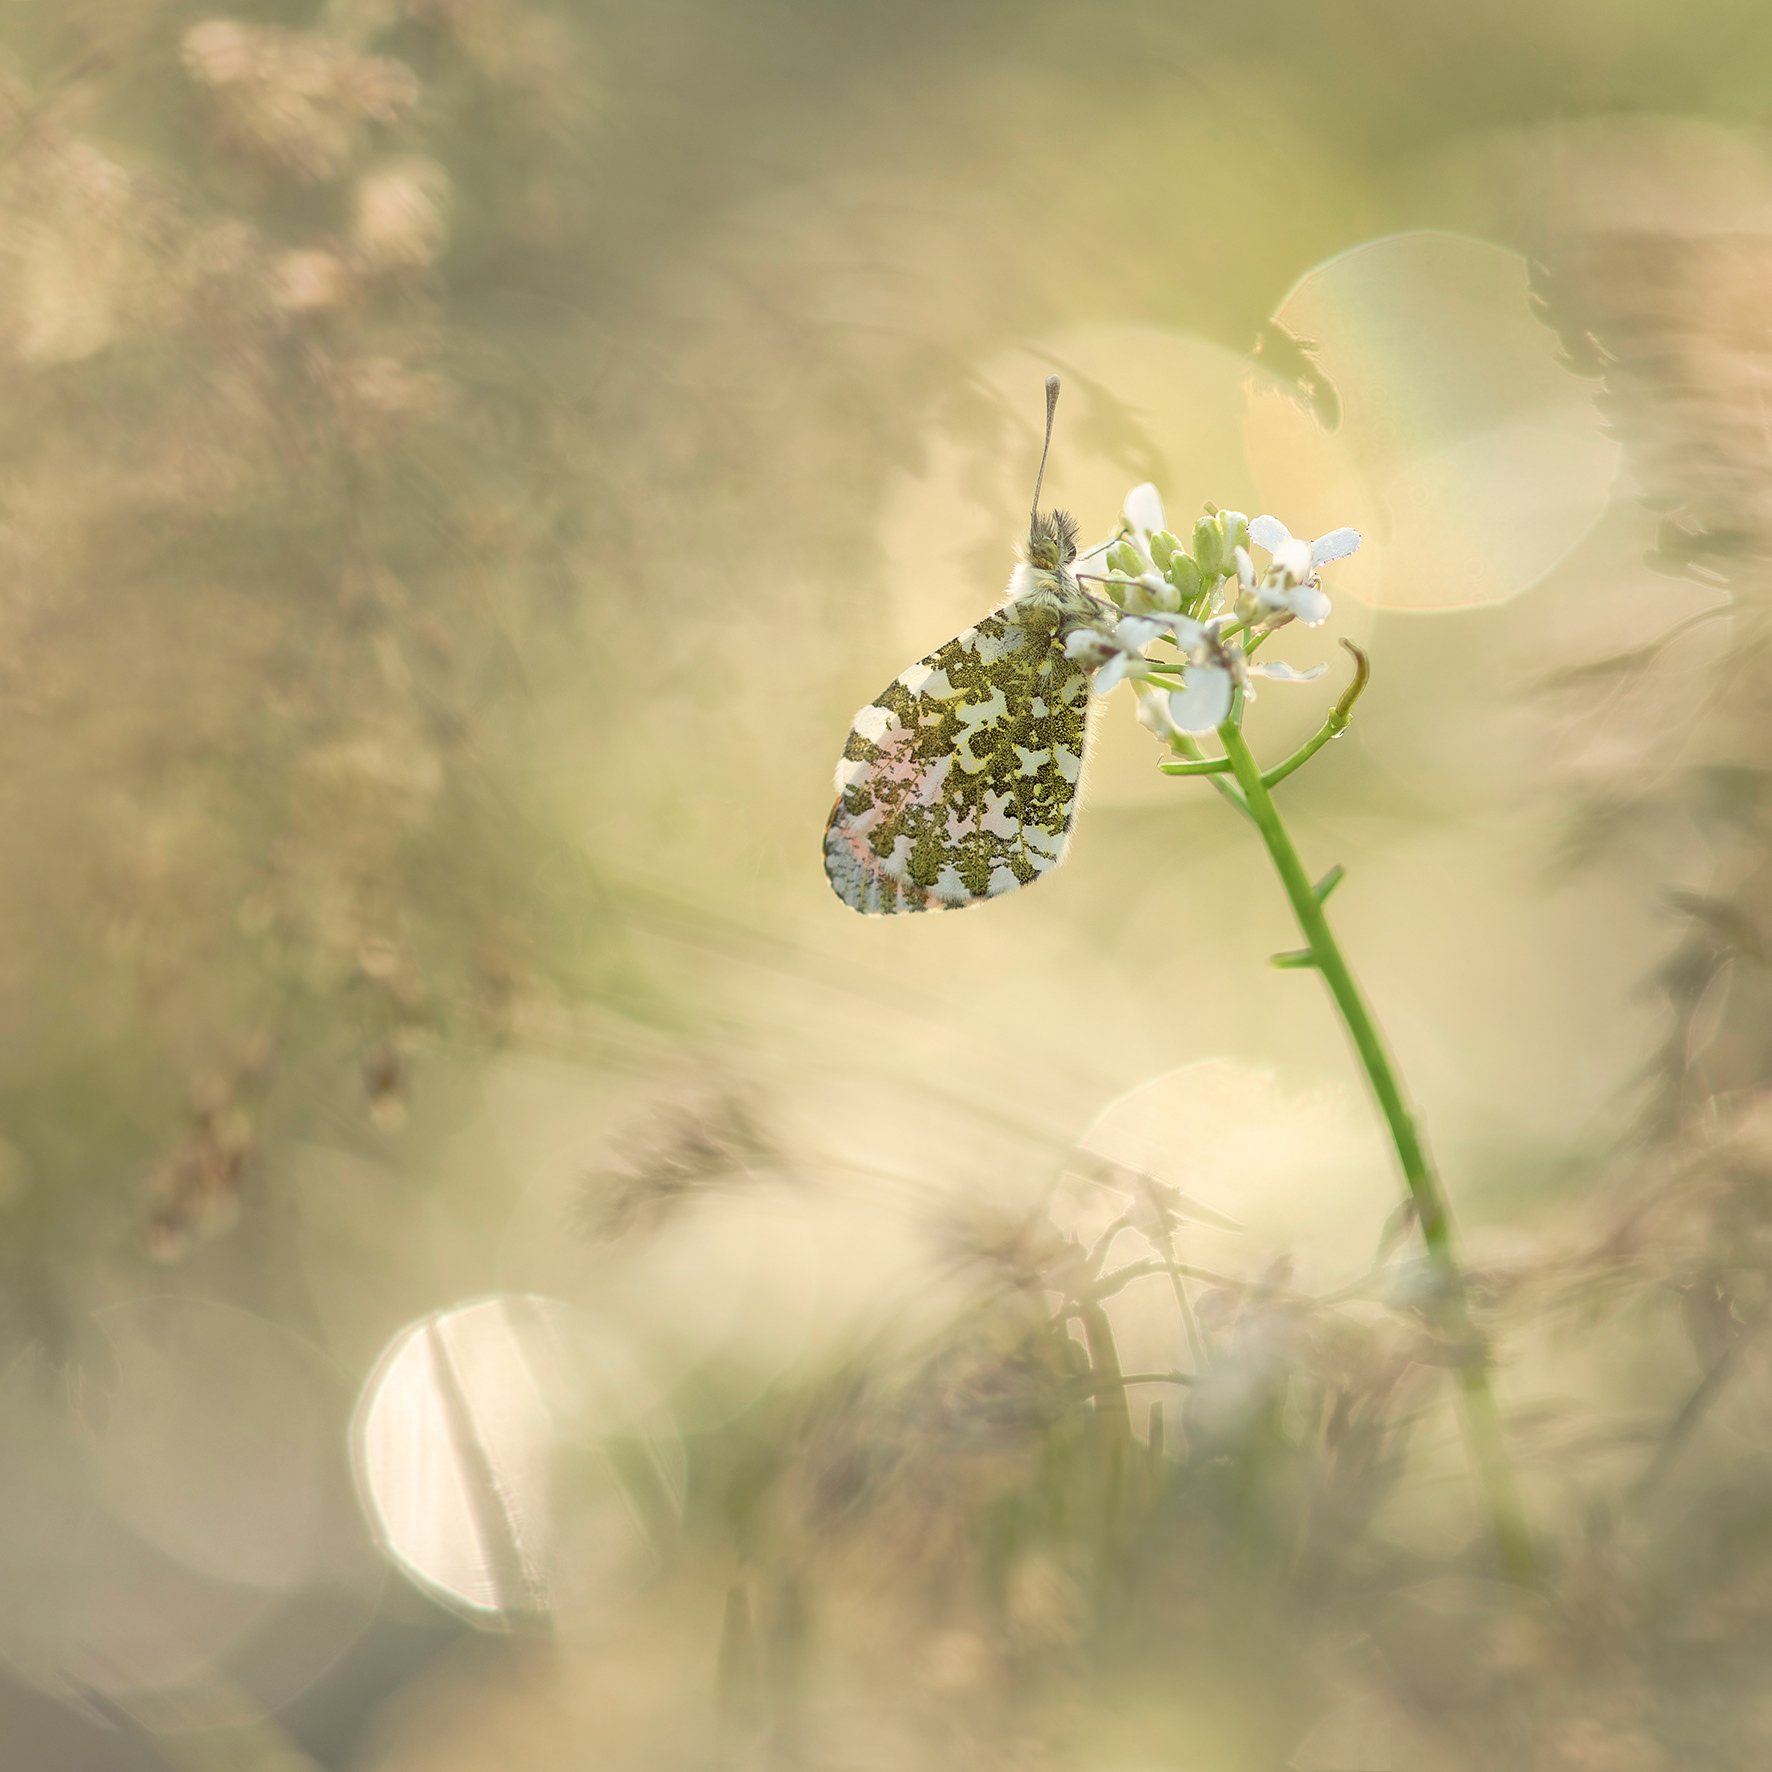 Neil Burnell Directs Our Gaze to the Delicate Beauty of Butterflies